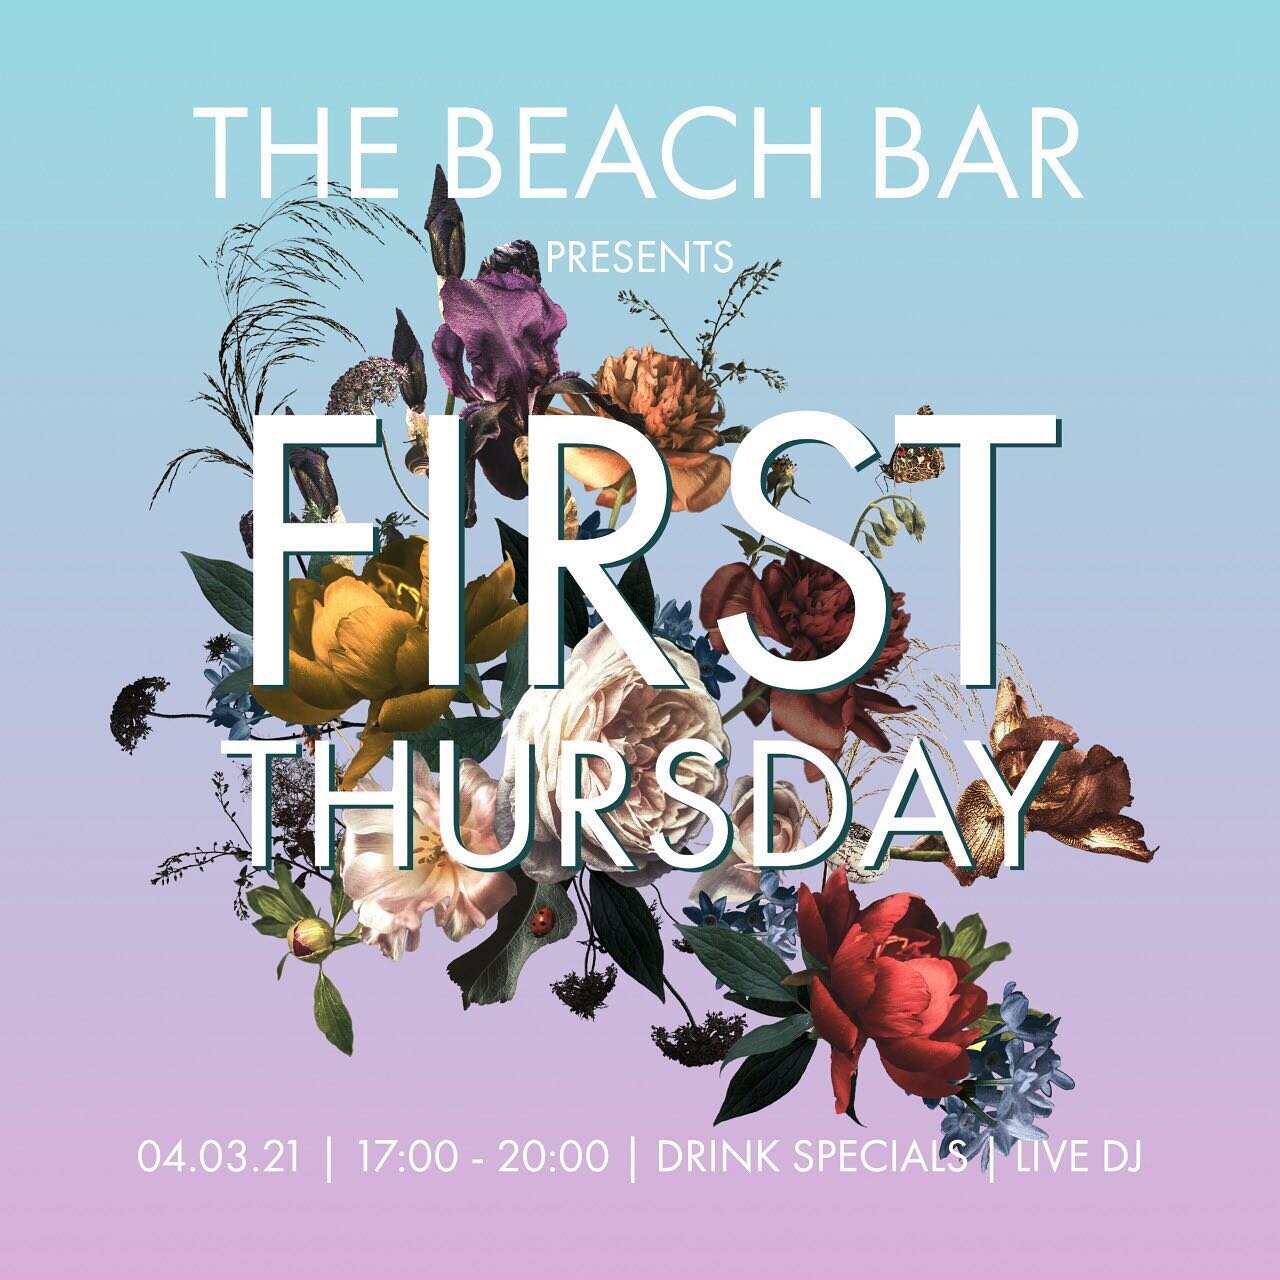 Hello Hout Bay, it's the beginning of a new month &amp; we are celebrating at @thebeachbarhoutbay. We would like to invite you to the first of many First Thursdays at the vibey BAR down by the Beach. Join us for a couple of drinks, grab a bite &amp; 